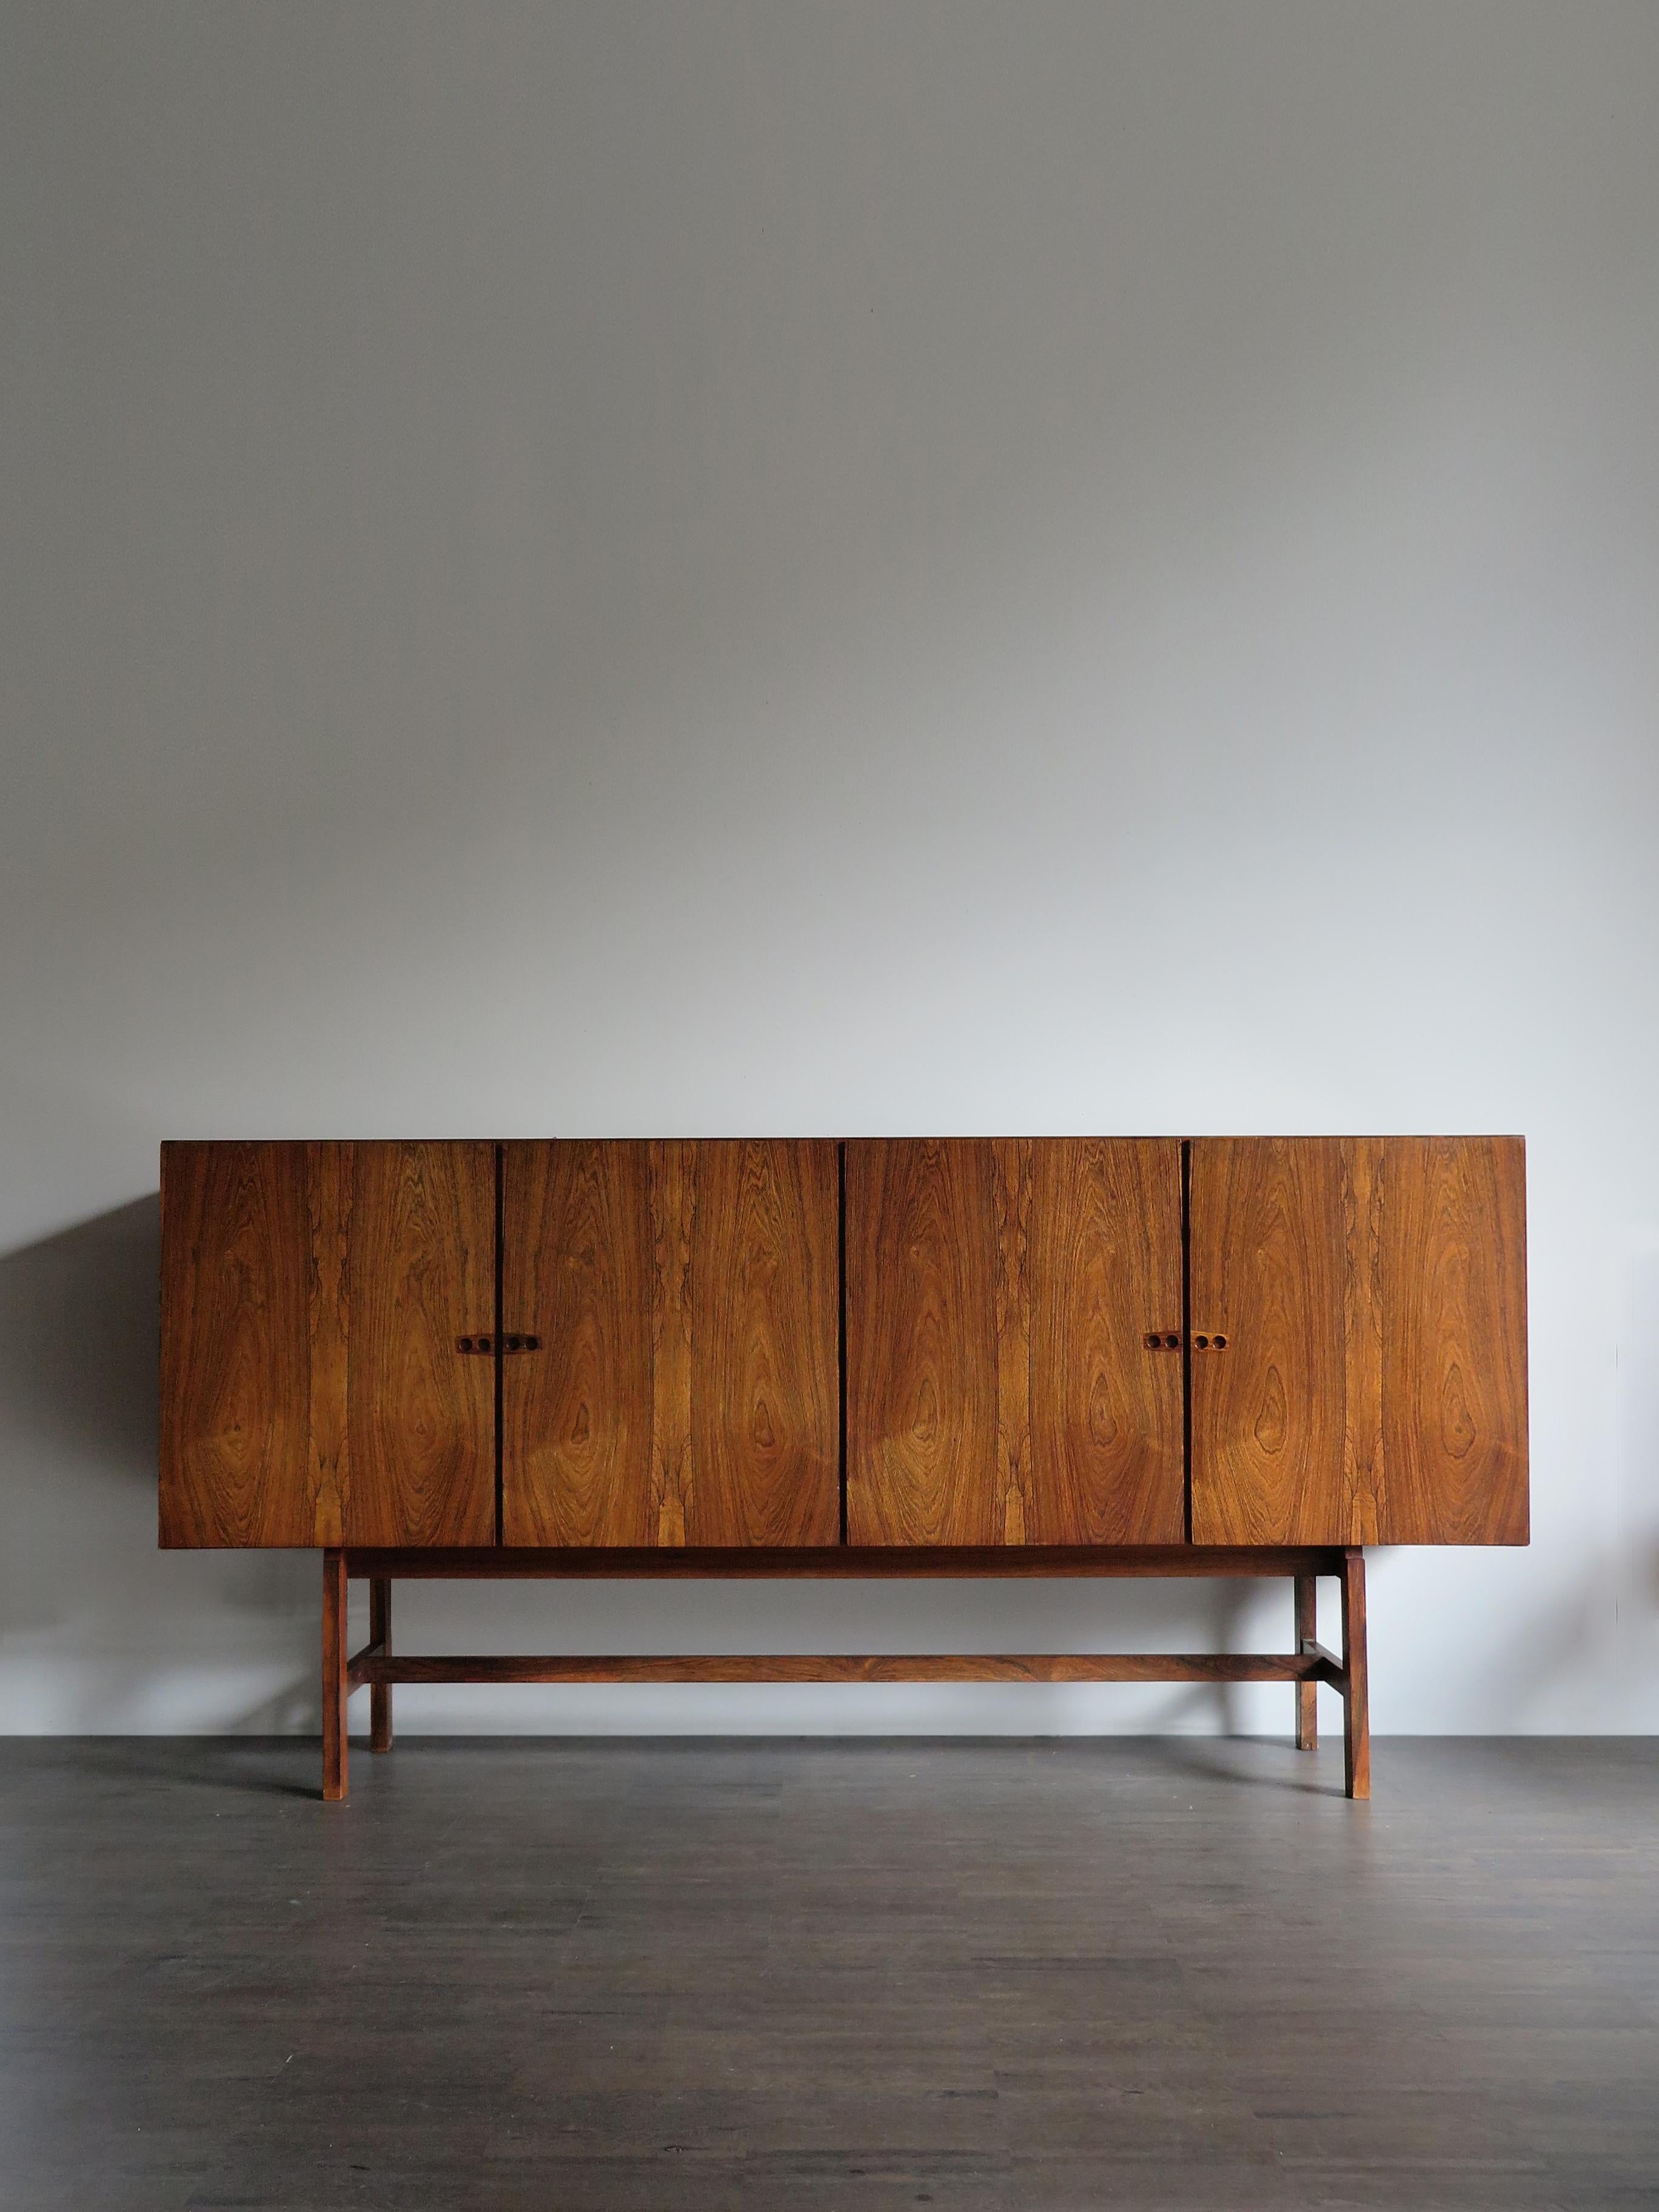 Scandinavian elegant and amazing dark wood big or height sideboard designed by Danish important artist Arne Vodder with bar space inside, brass details, circa 1960s.

Please note that the sideboard is original of the period and thus shows normal